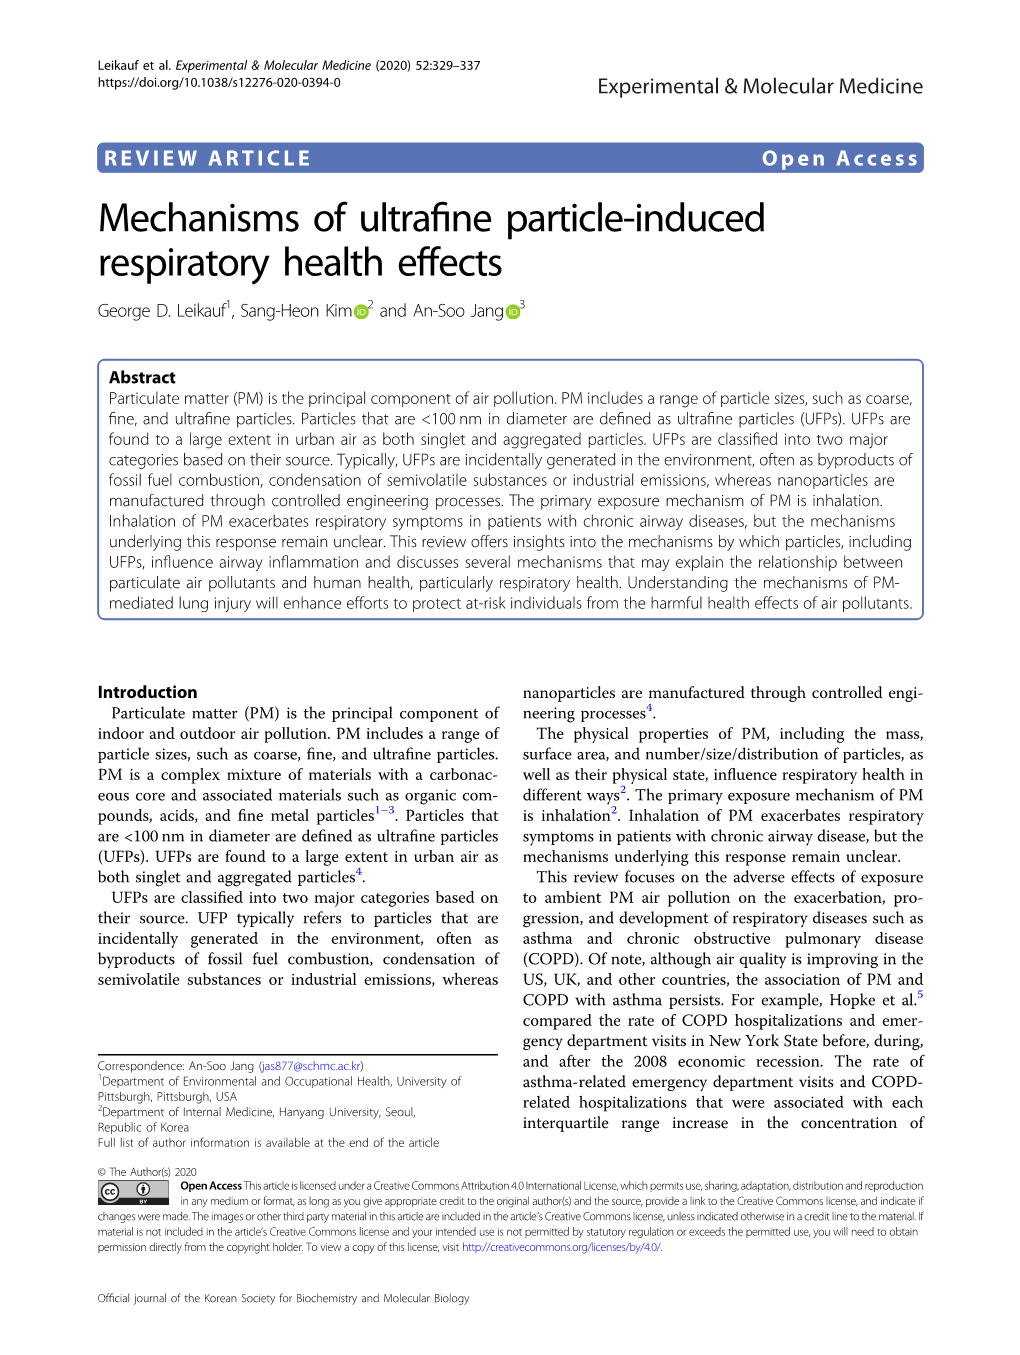 Mechanisms of Ultrafine Particle-Induced Respiratory Health Effects